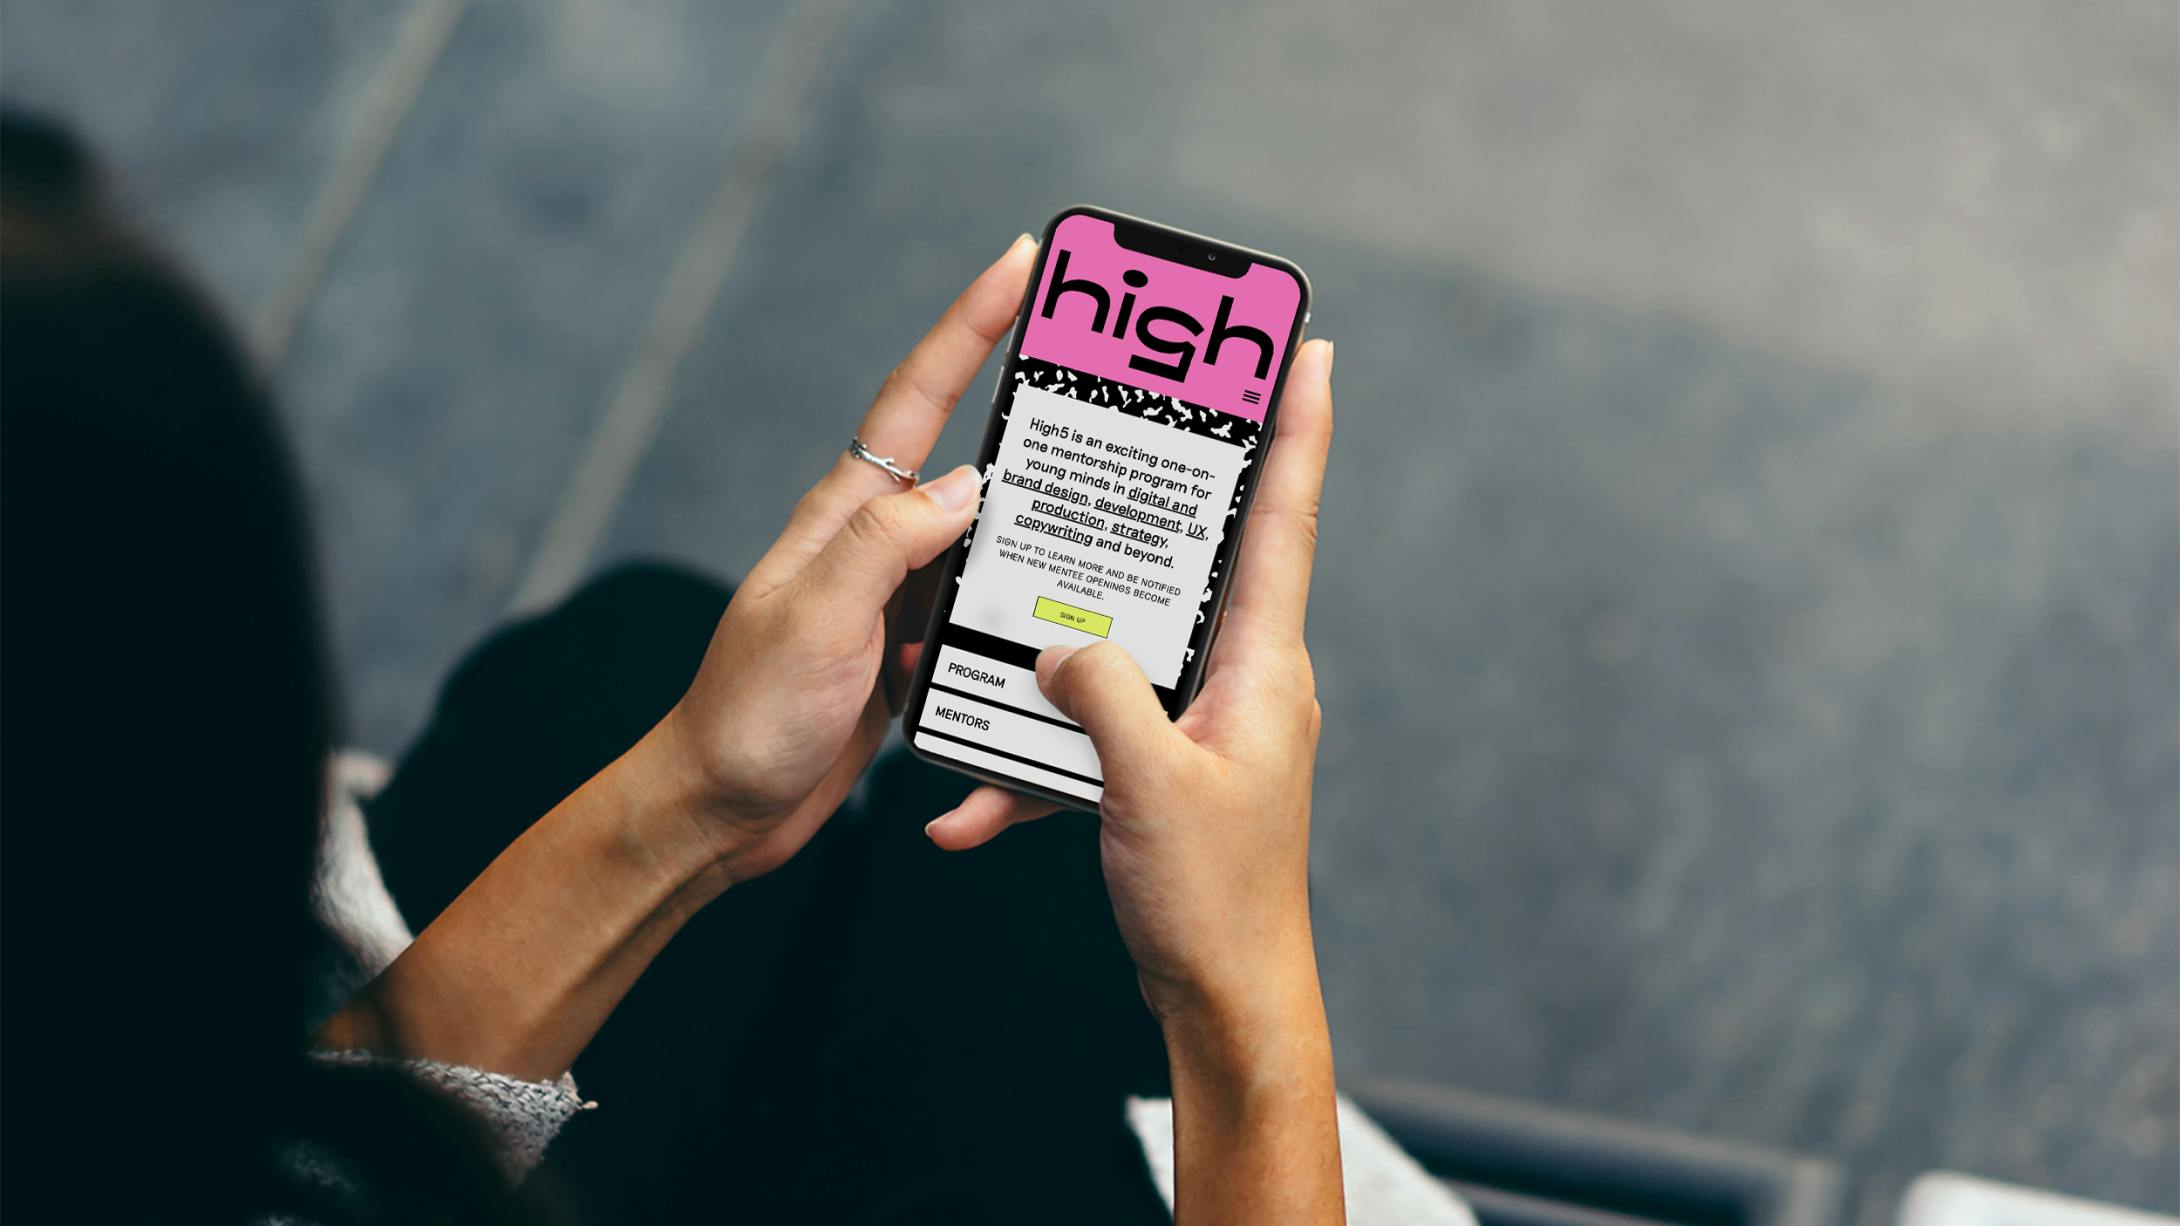 A woman looking at the High5 site on her phone